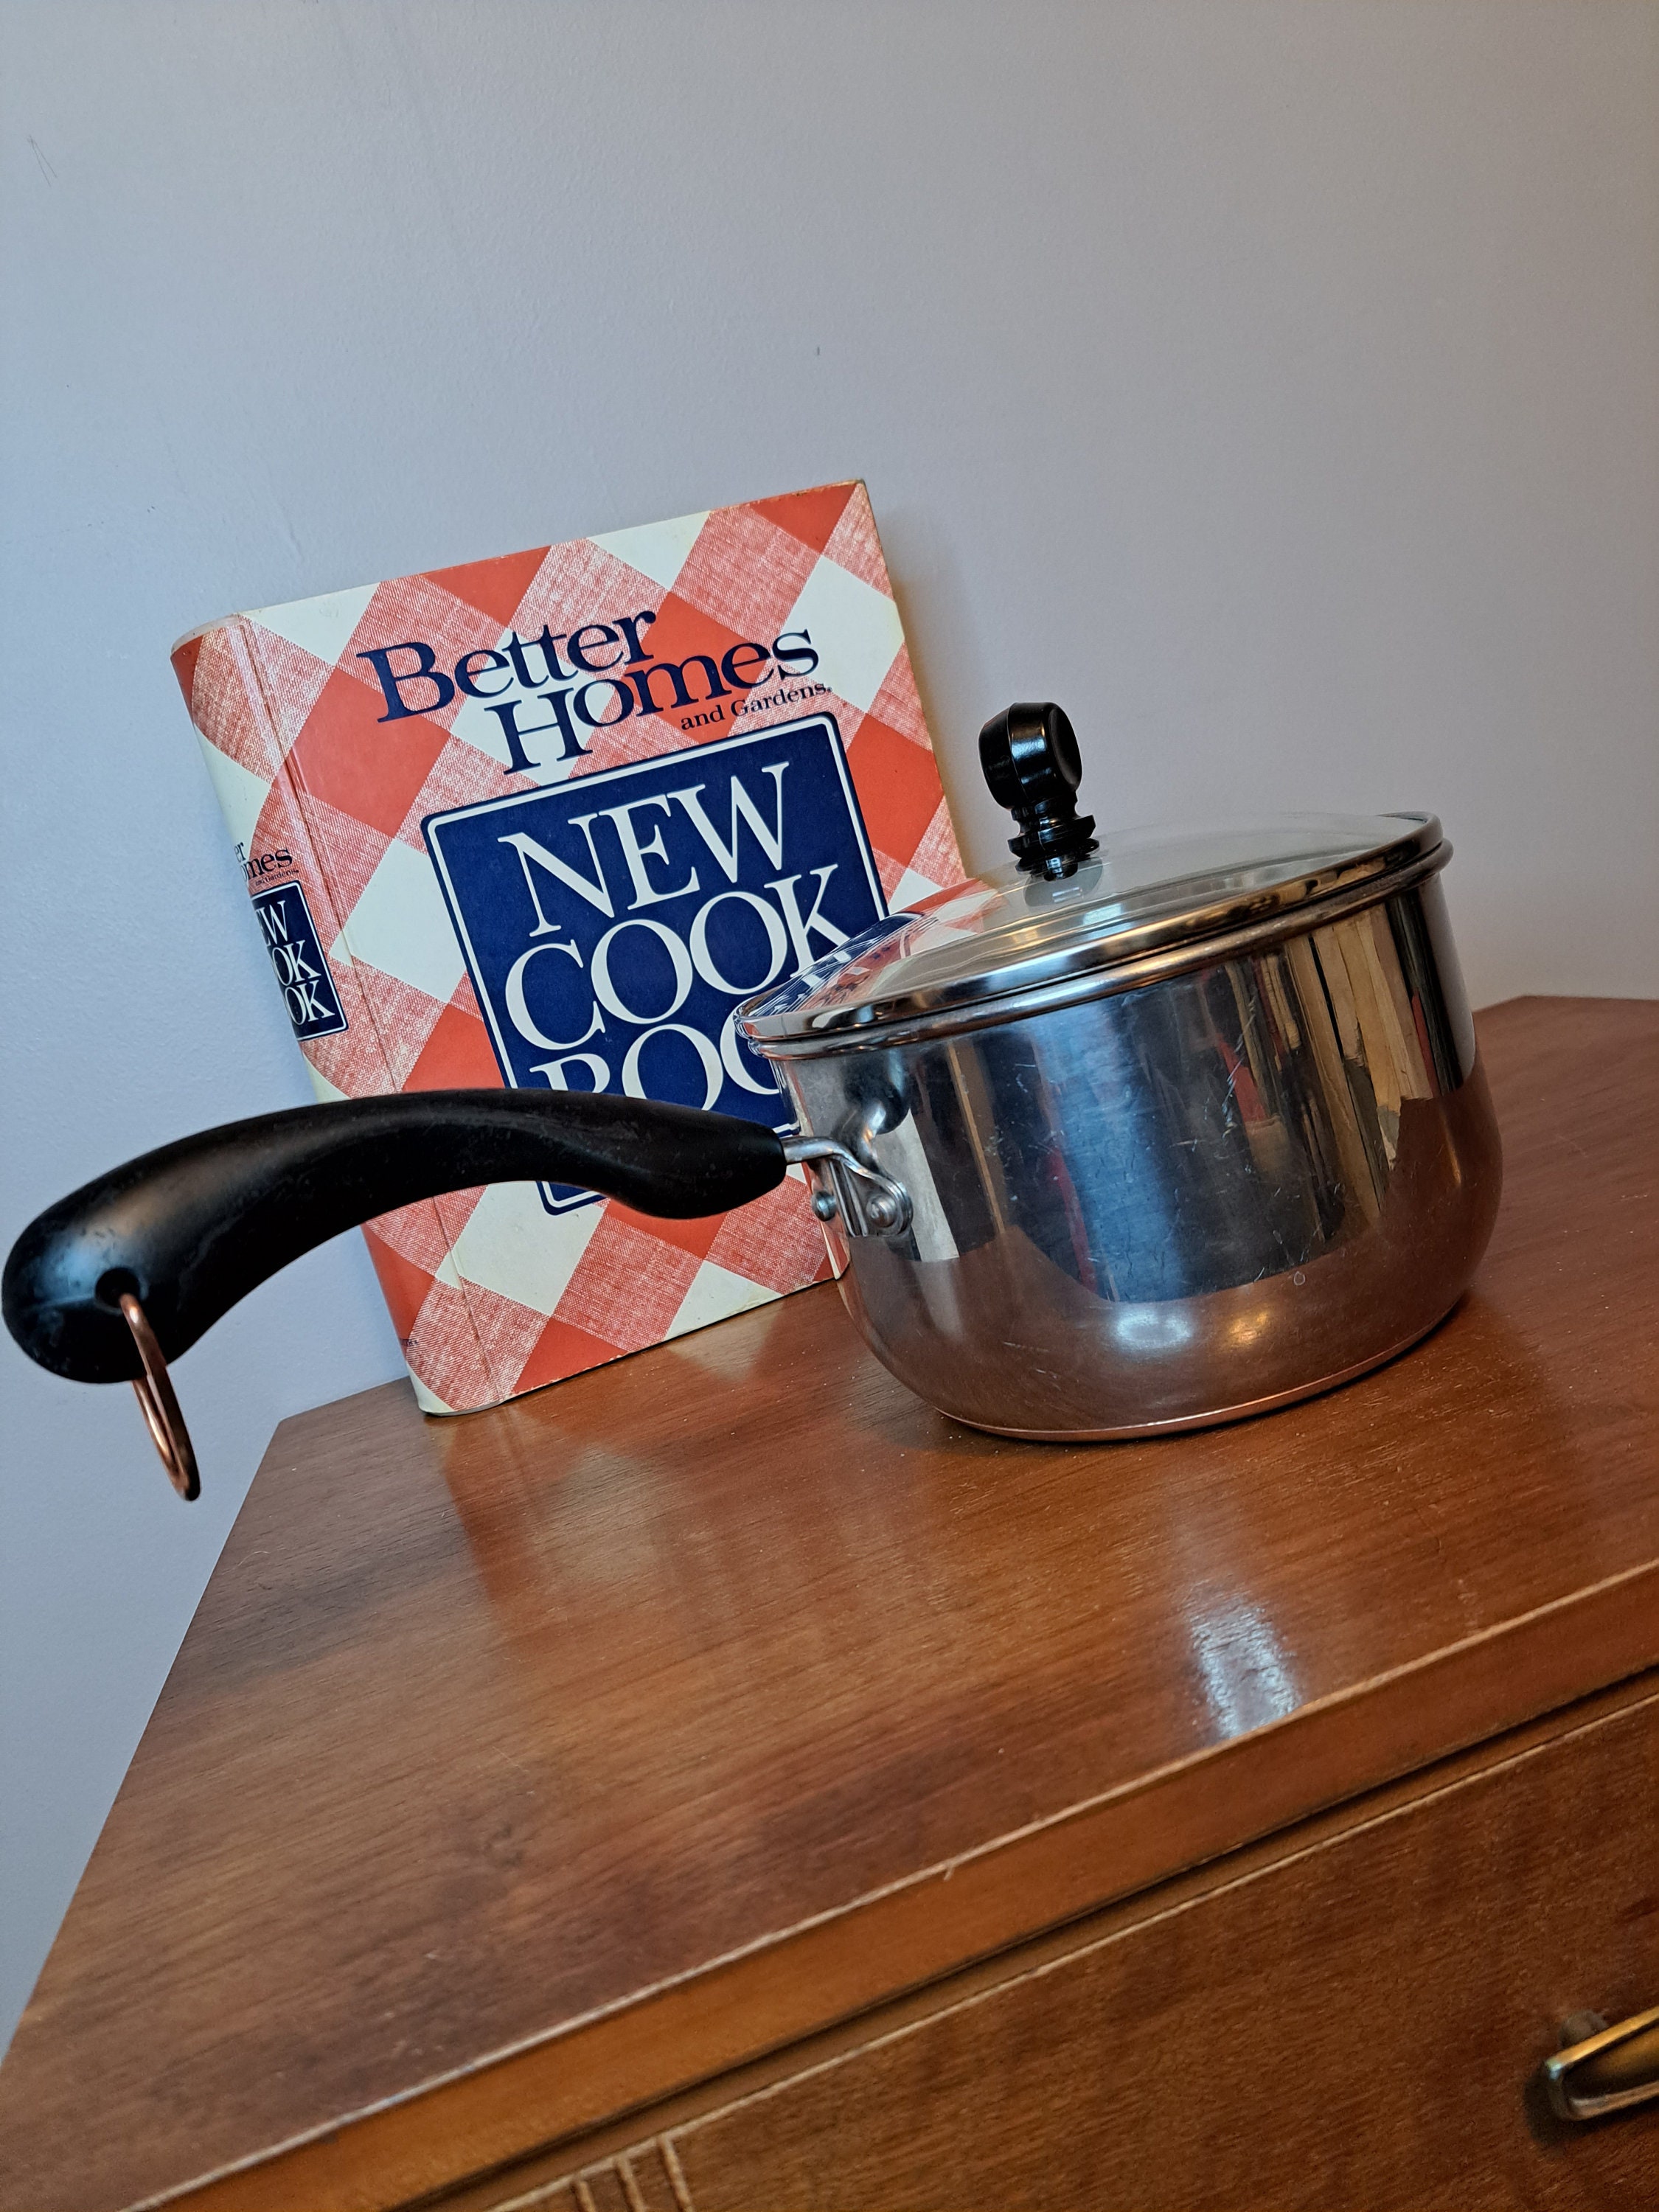 Copper Bottom Stainless Steel Pan Paula Deen Signature Copper Cooking  Conduction 2 Quart Two Qt. Pan With Glass Lid Copper Pan 